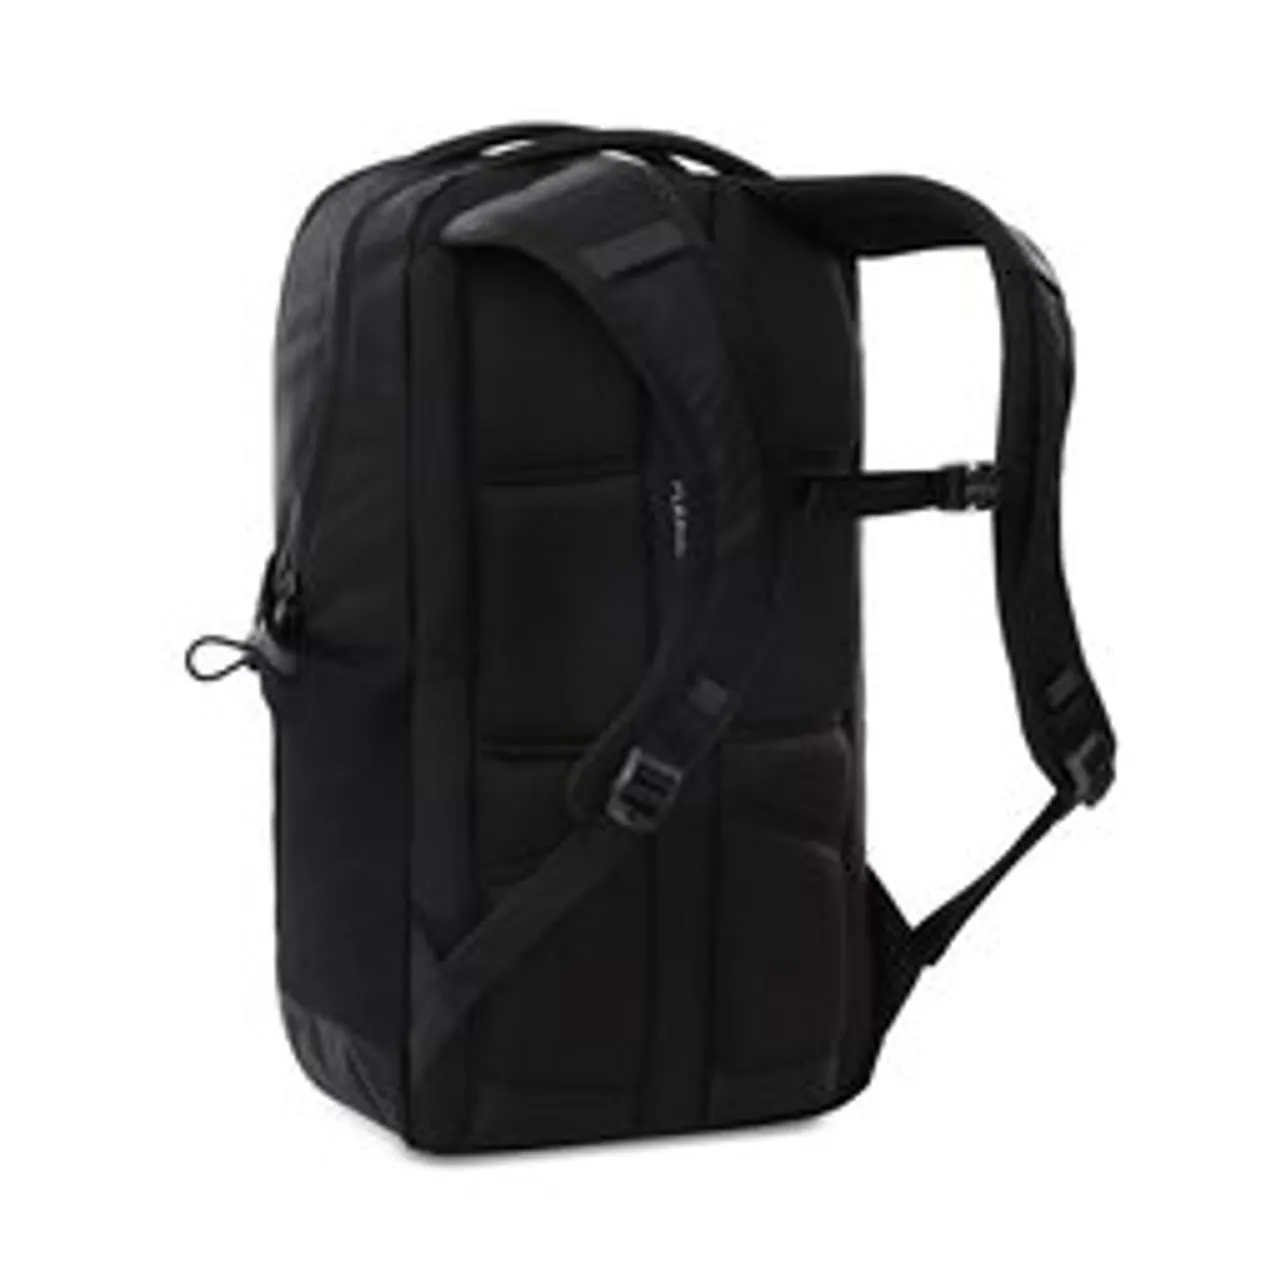 Rucksack The North Face Jester NF0A3VXGJK31 Tnf Black